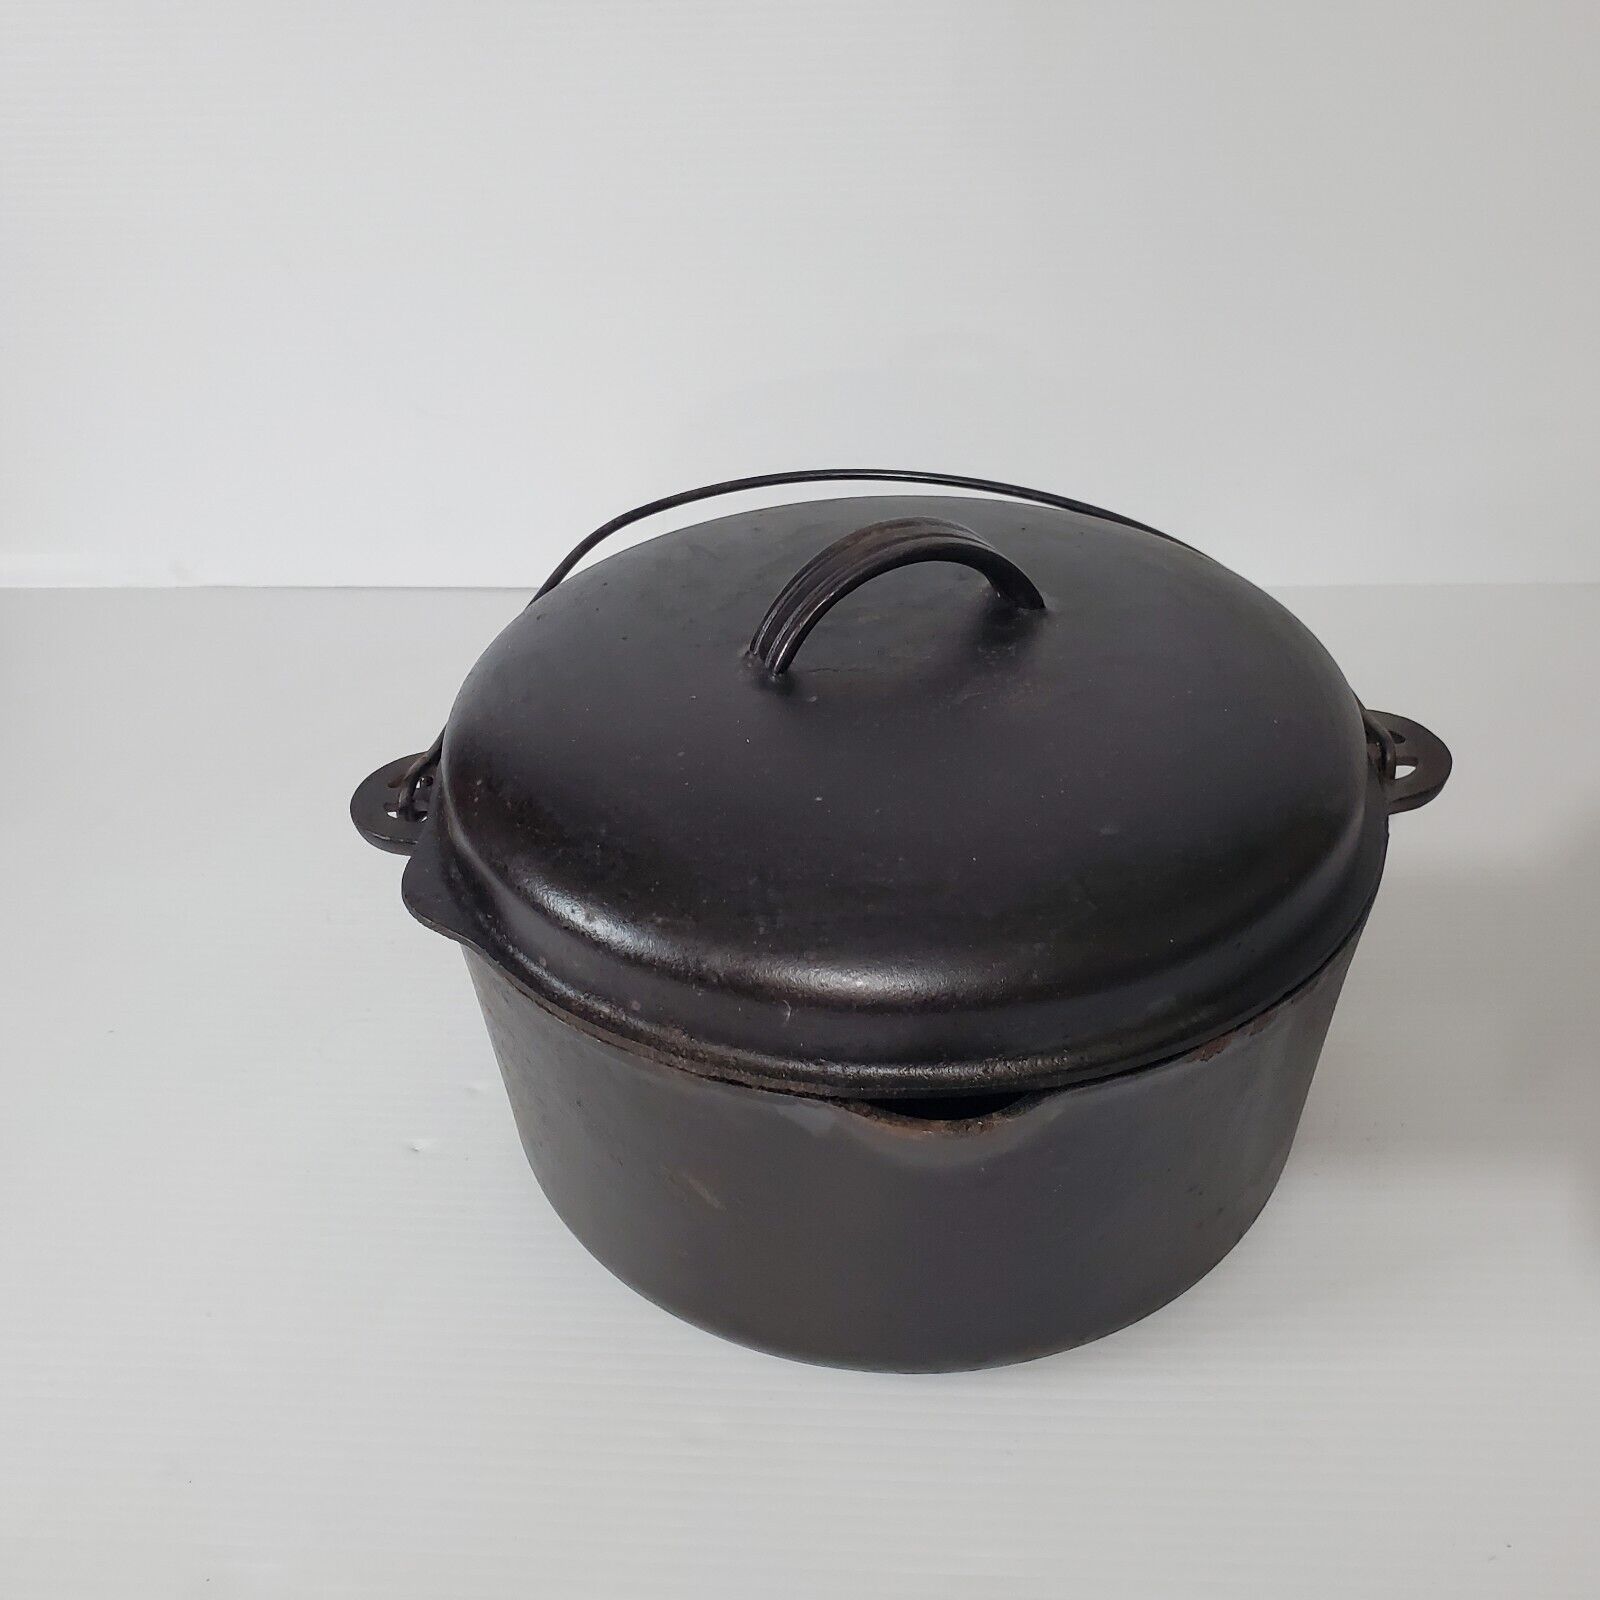 Vintage Chicago Iron Works Foundry Cast Iron Pot Dutch Oven With Lid Antique S10